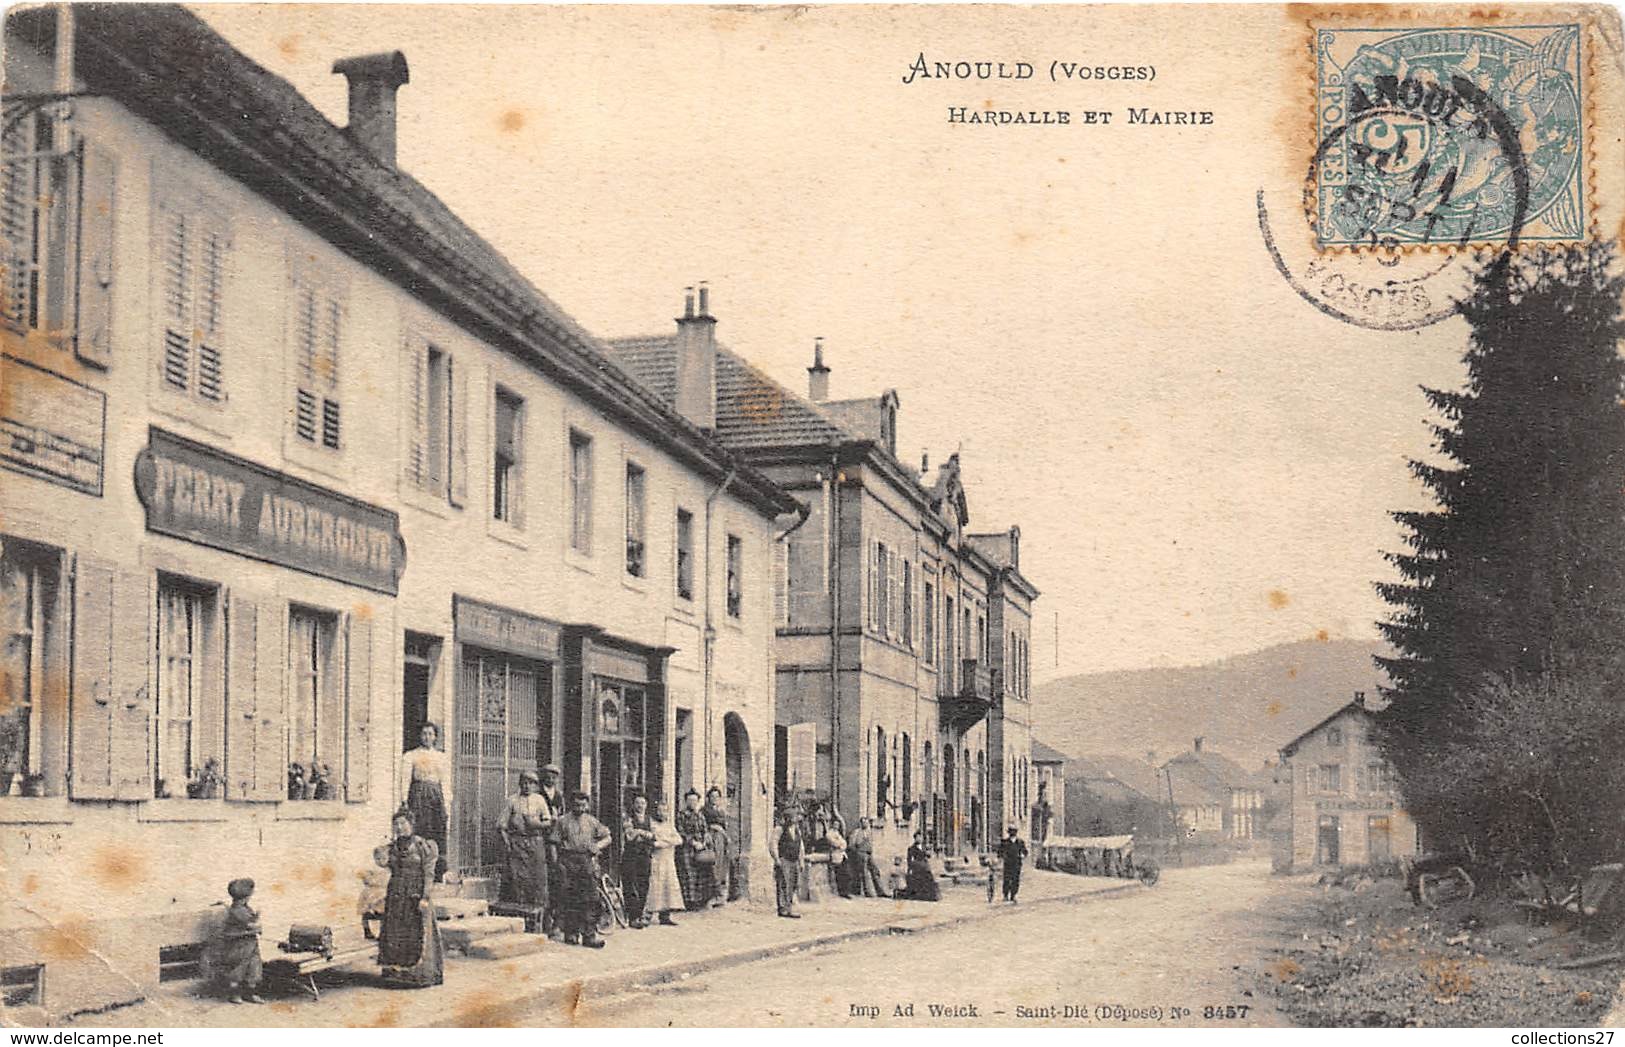 88-ANOULD- HARDALLE ET MAIRIE - Anould